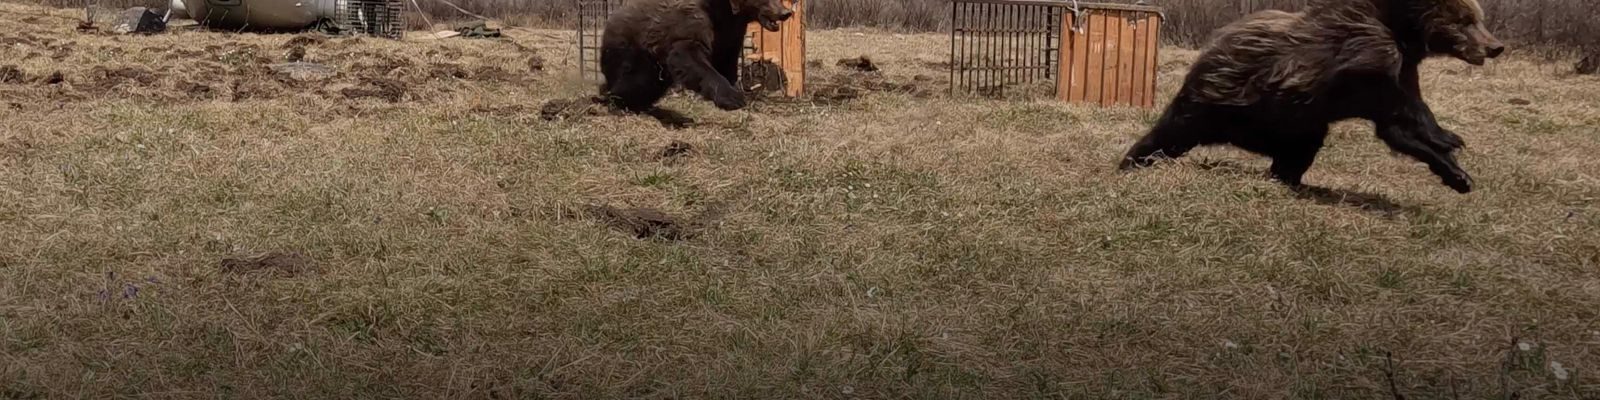 Rescued bears run free, their transport crate and helicopter in the background.